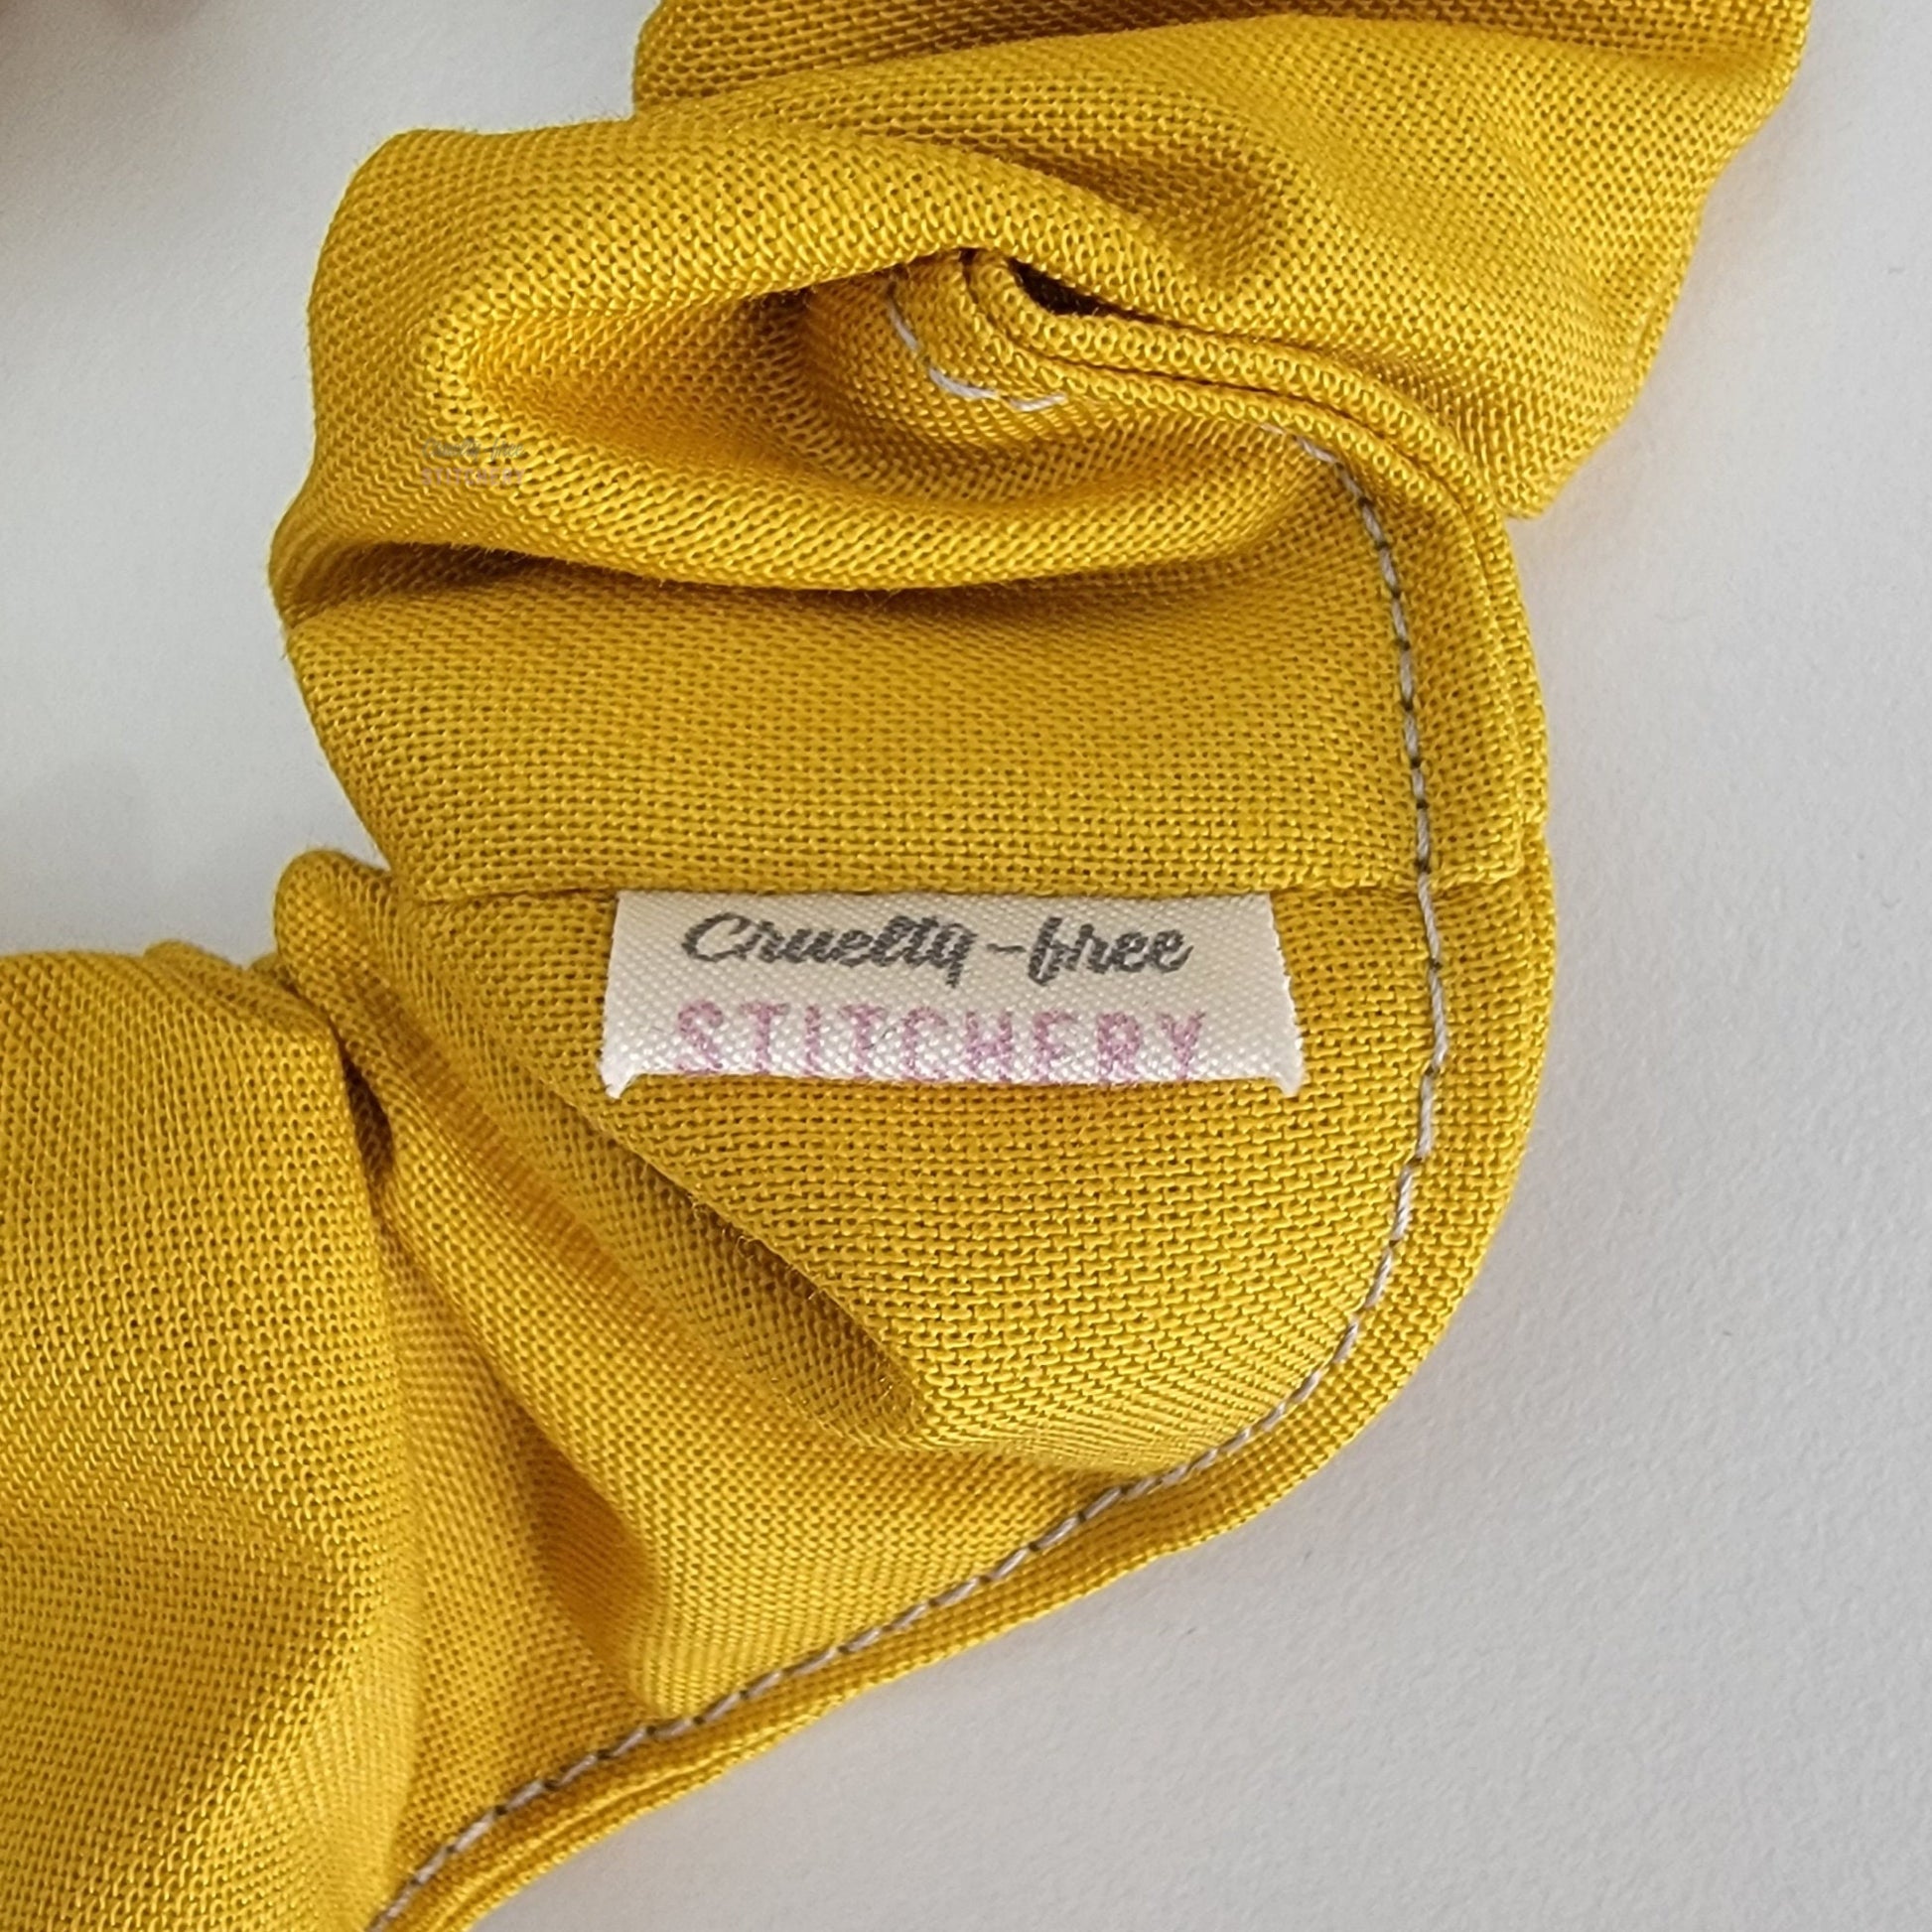 Close-up of the solid mustard yellow scrunchie with a small white tag with the Cruelty-Free Stitchery logo.